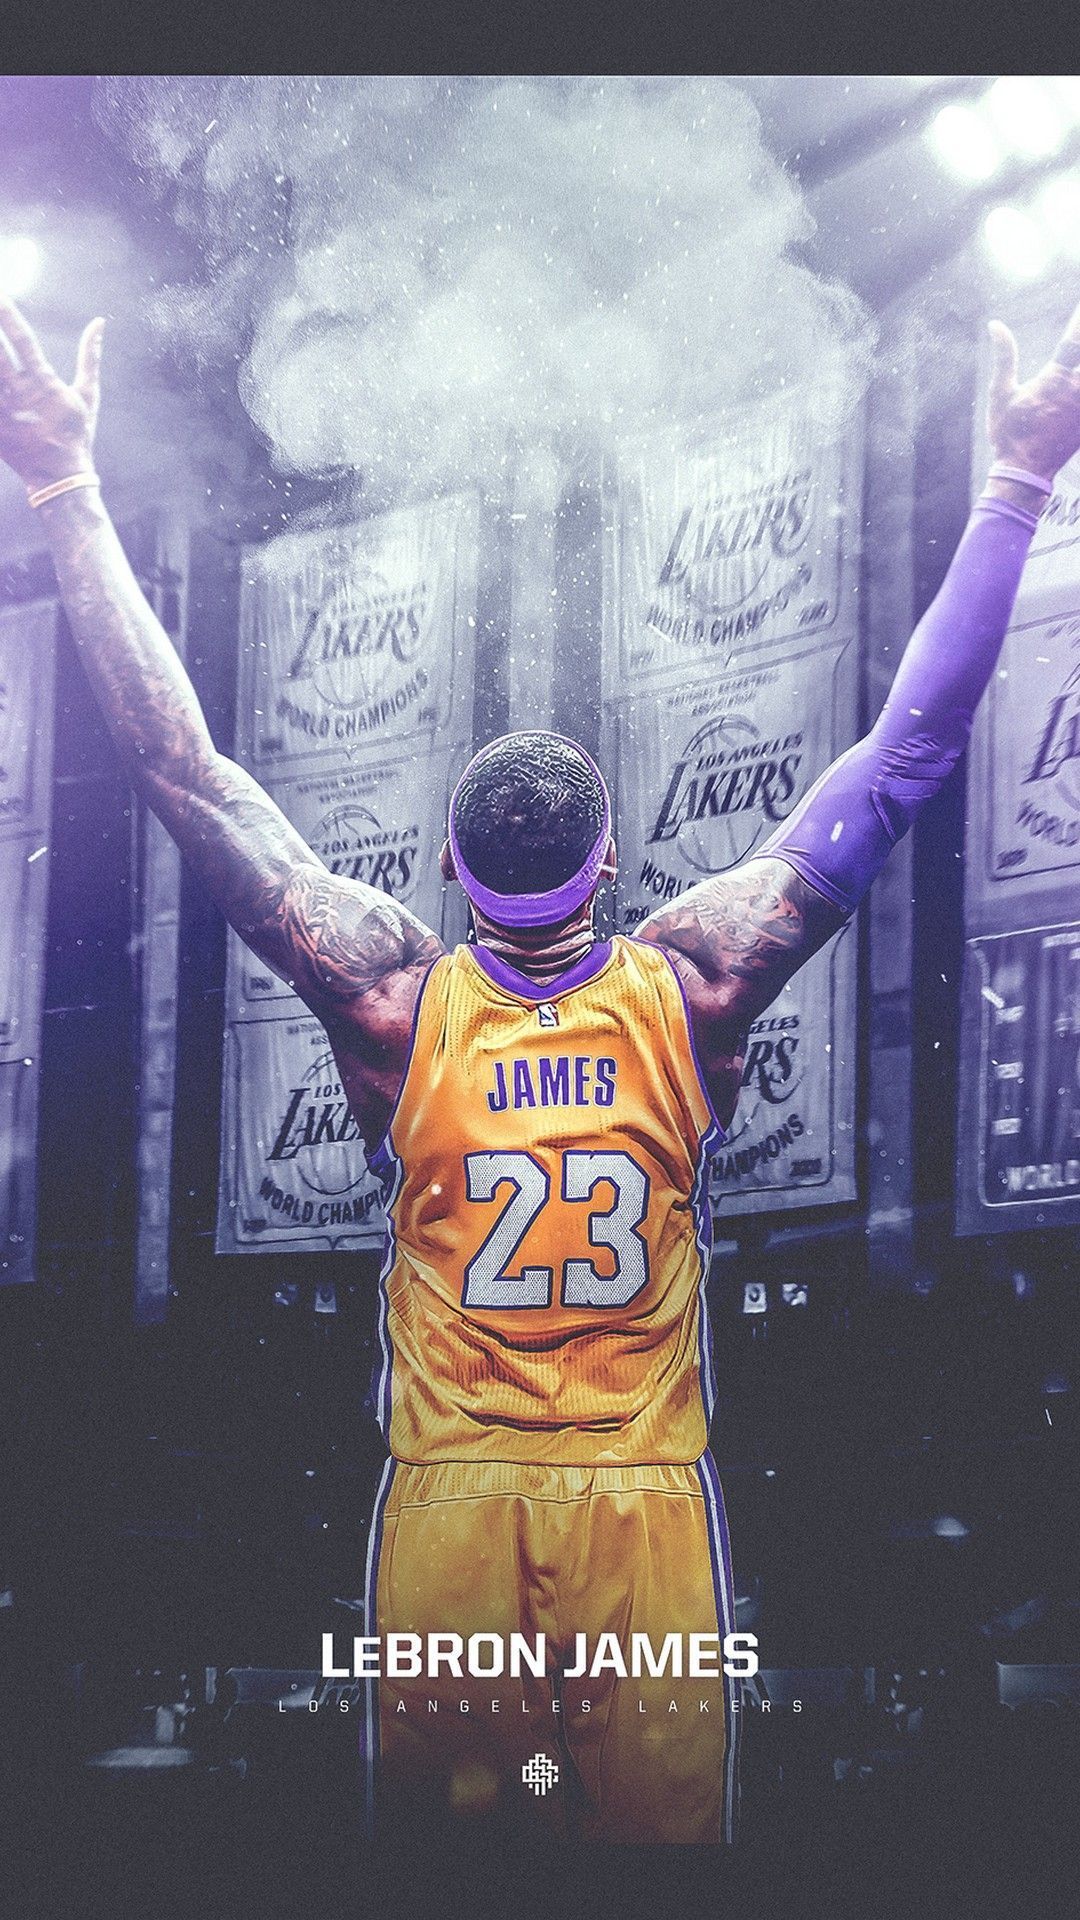 Lakers wallpaper for mobile devices! (iPhone, Android, etc.) Credit to the artist! - Los Angeles Lakers